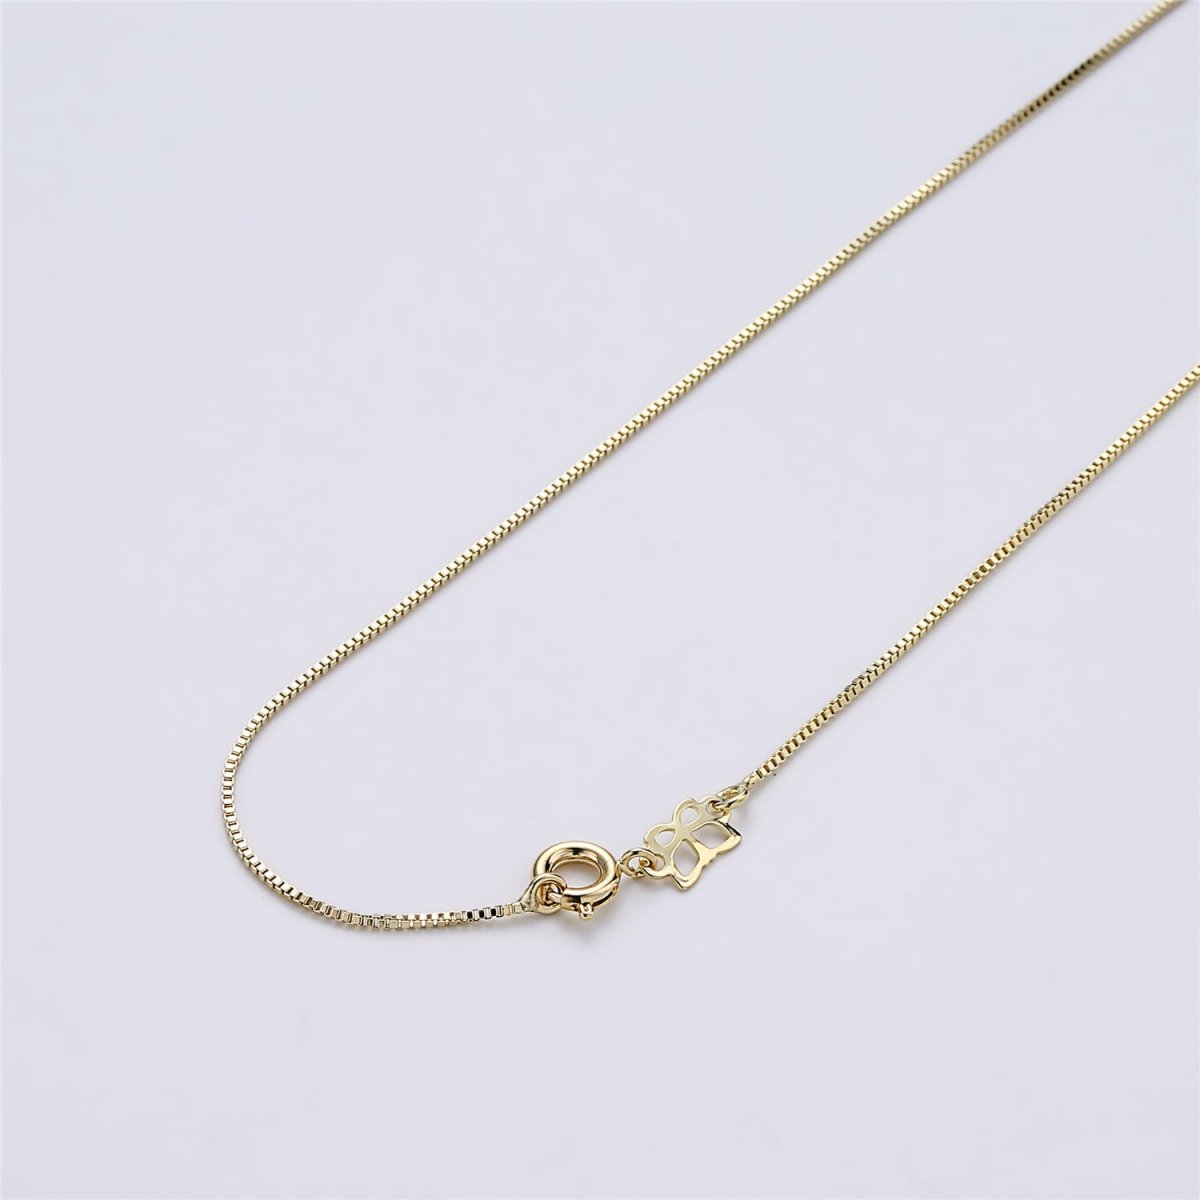 14K Gold Filled Box Chain Necklace, 18 Inch Box Chain Necklace, Dainty 0.7mm Box Necklace w/ Spring Ring | WA-411 Clearance Pricing - DLUXCA